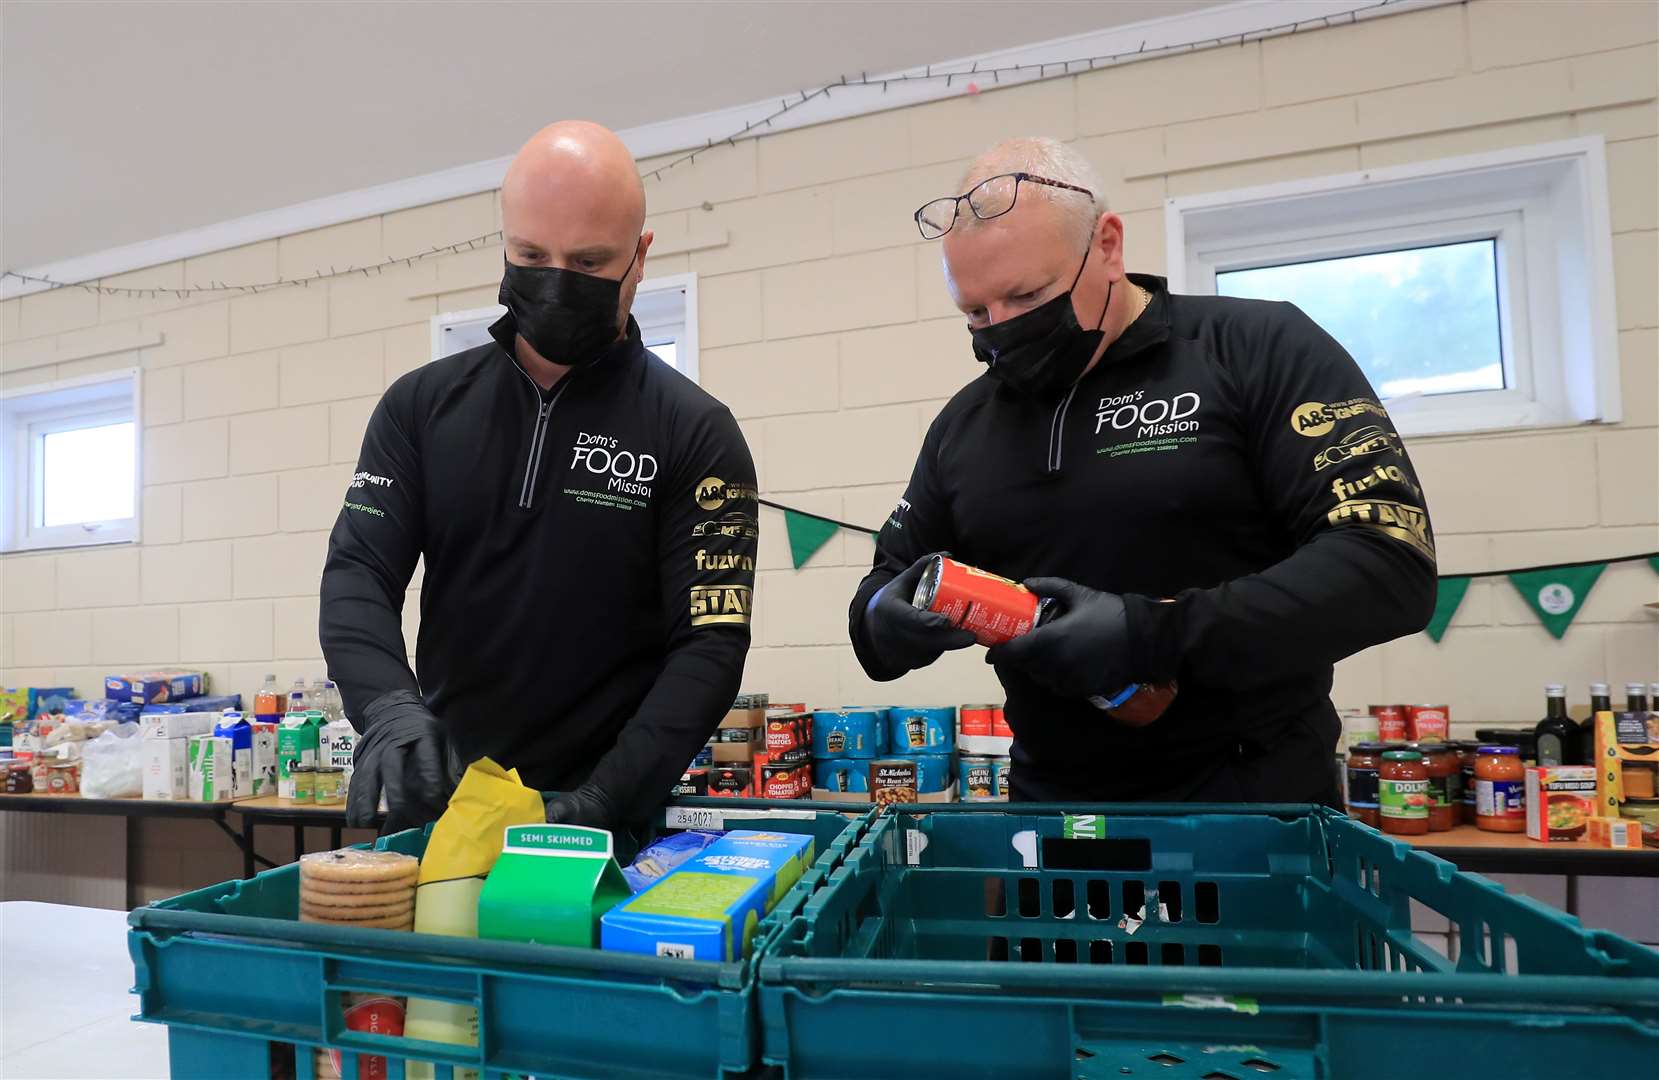 Dominic Warren, winner in the environment category of the 2020 National Lottery Awards, packs food parcels with his project co-ordinator Tony Fuller (right) (Gareth Fuller/PA)